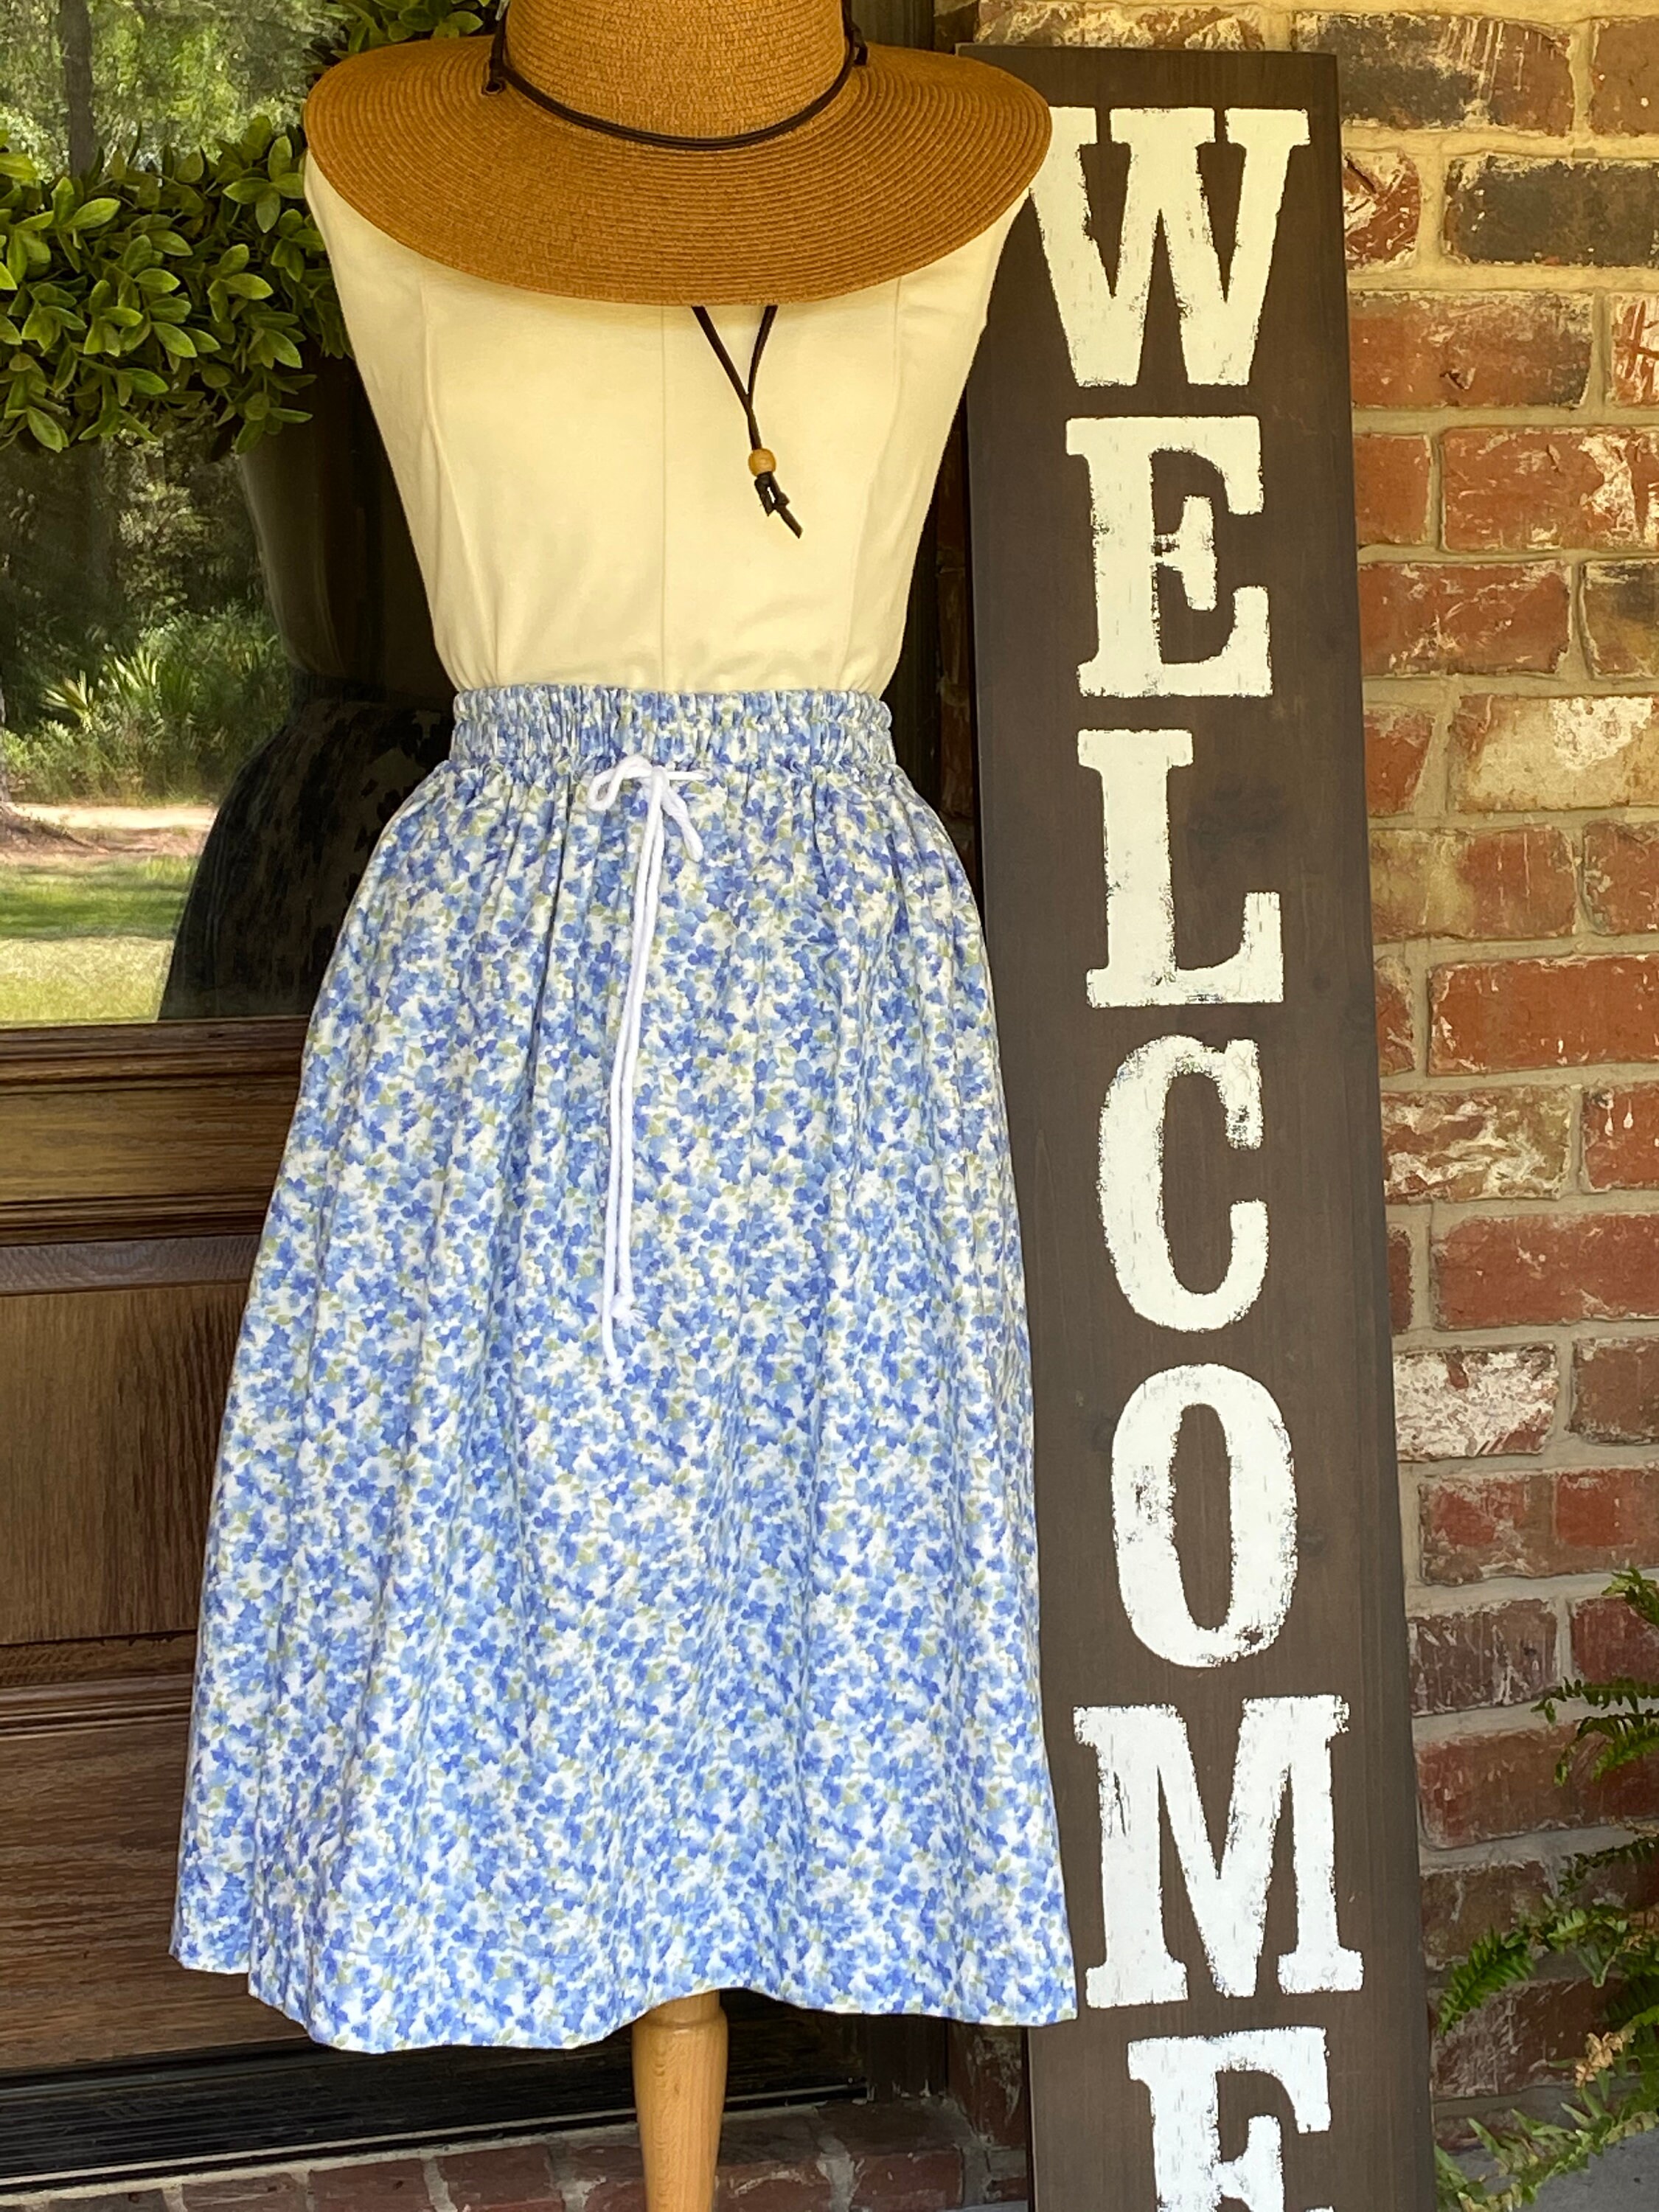 Clothing & Accessories :: Women's :: Skirts :: Blue floral gathered ...